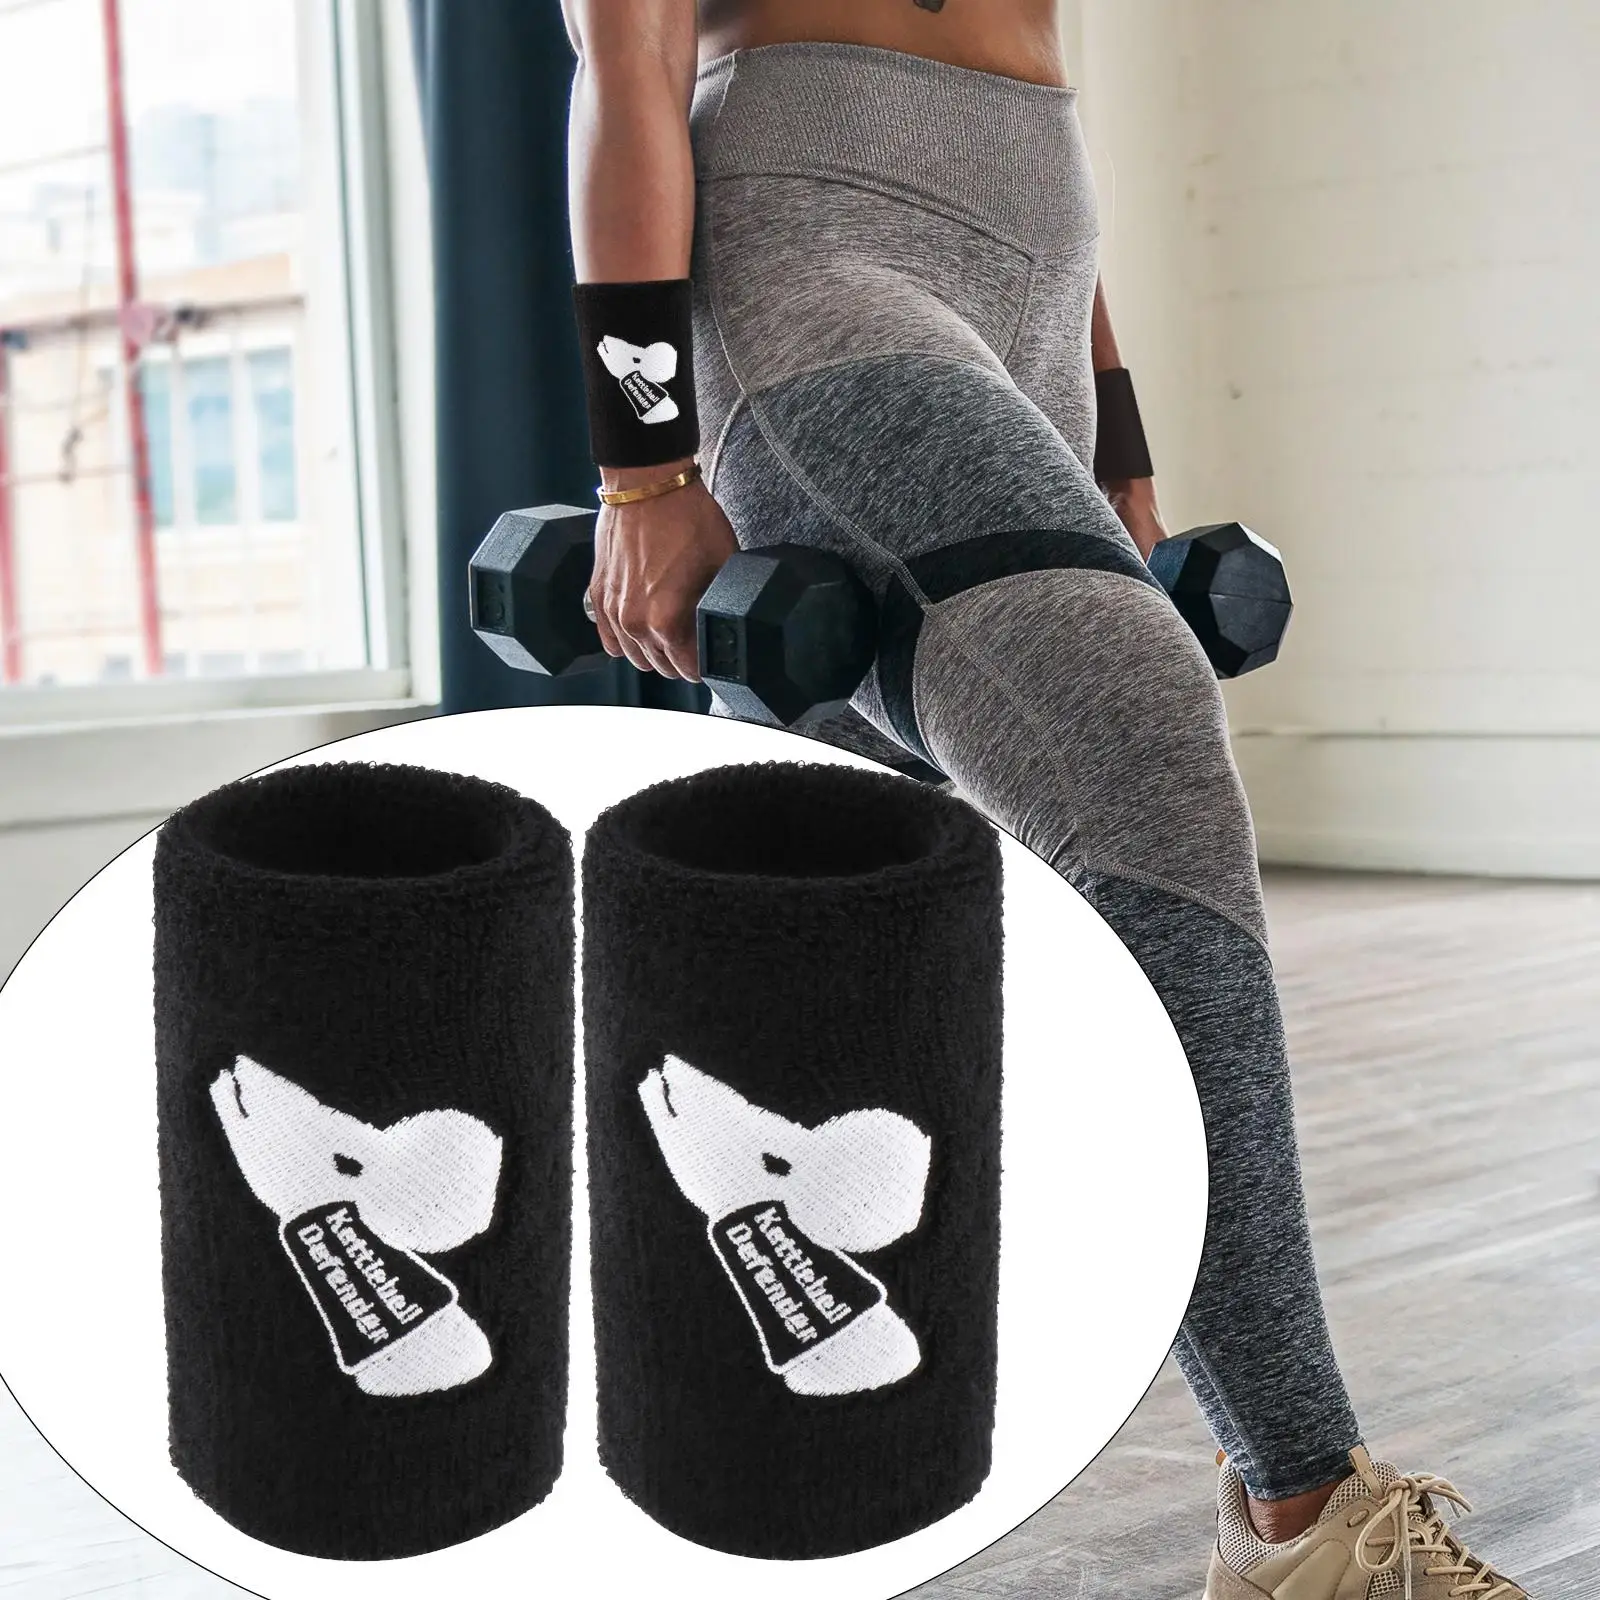 2 Pieces Breathable Kettlebell Wrist Guards Elastic Wristband Provides Support Forearm Protector for Men Women Avoid Injury